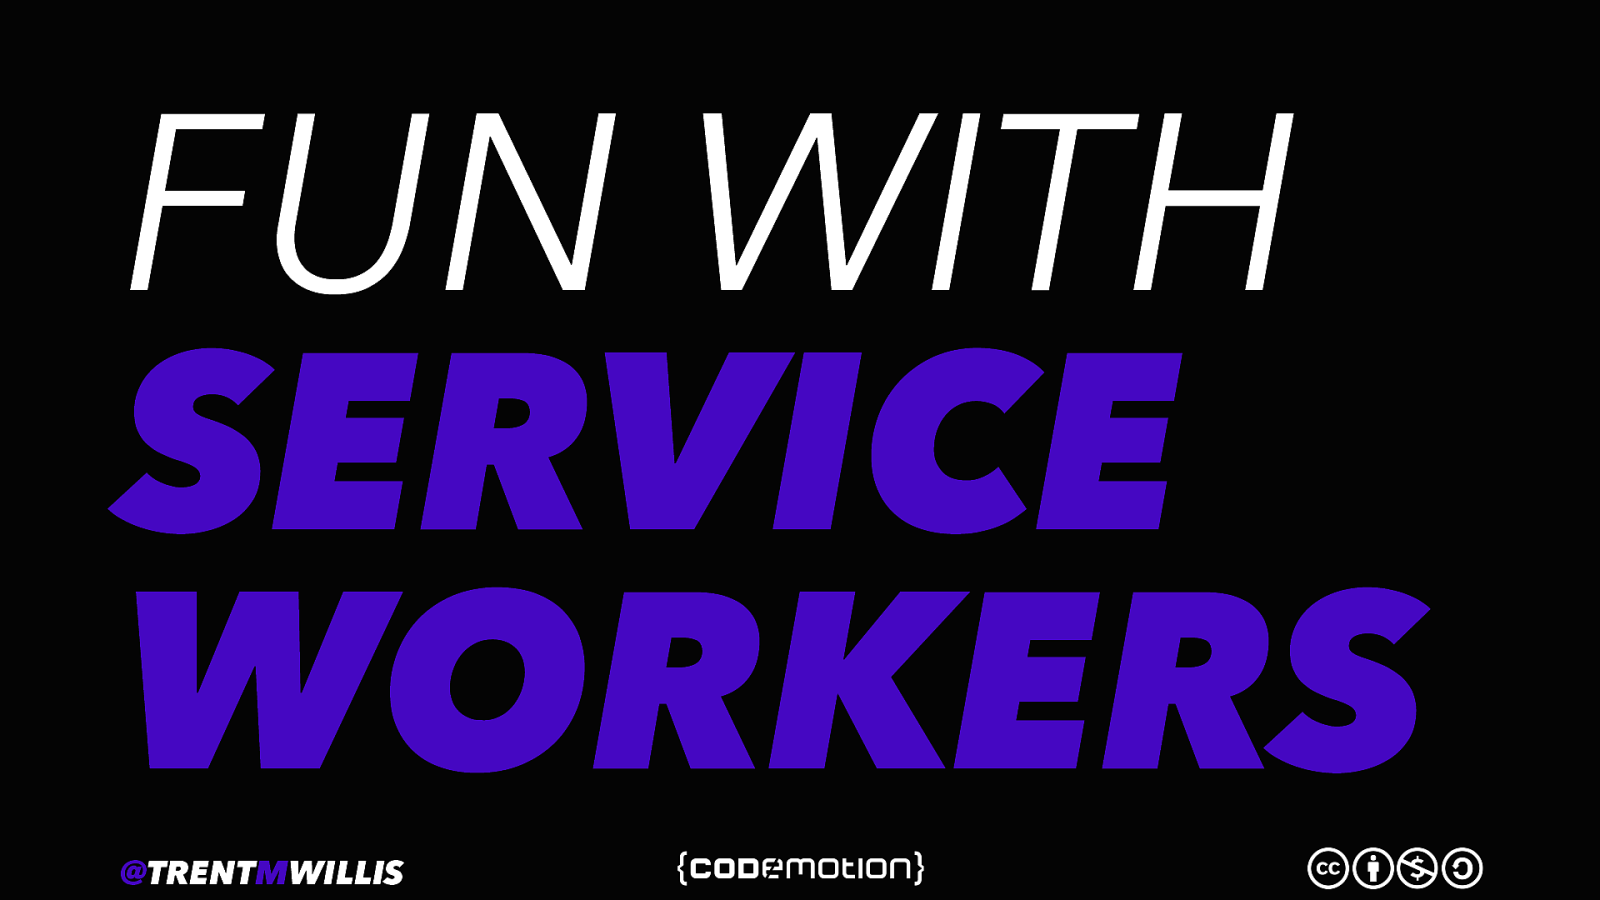 Fun with Service Workers